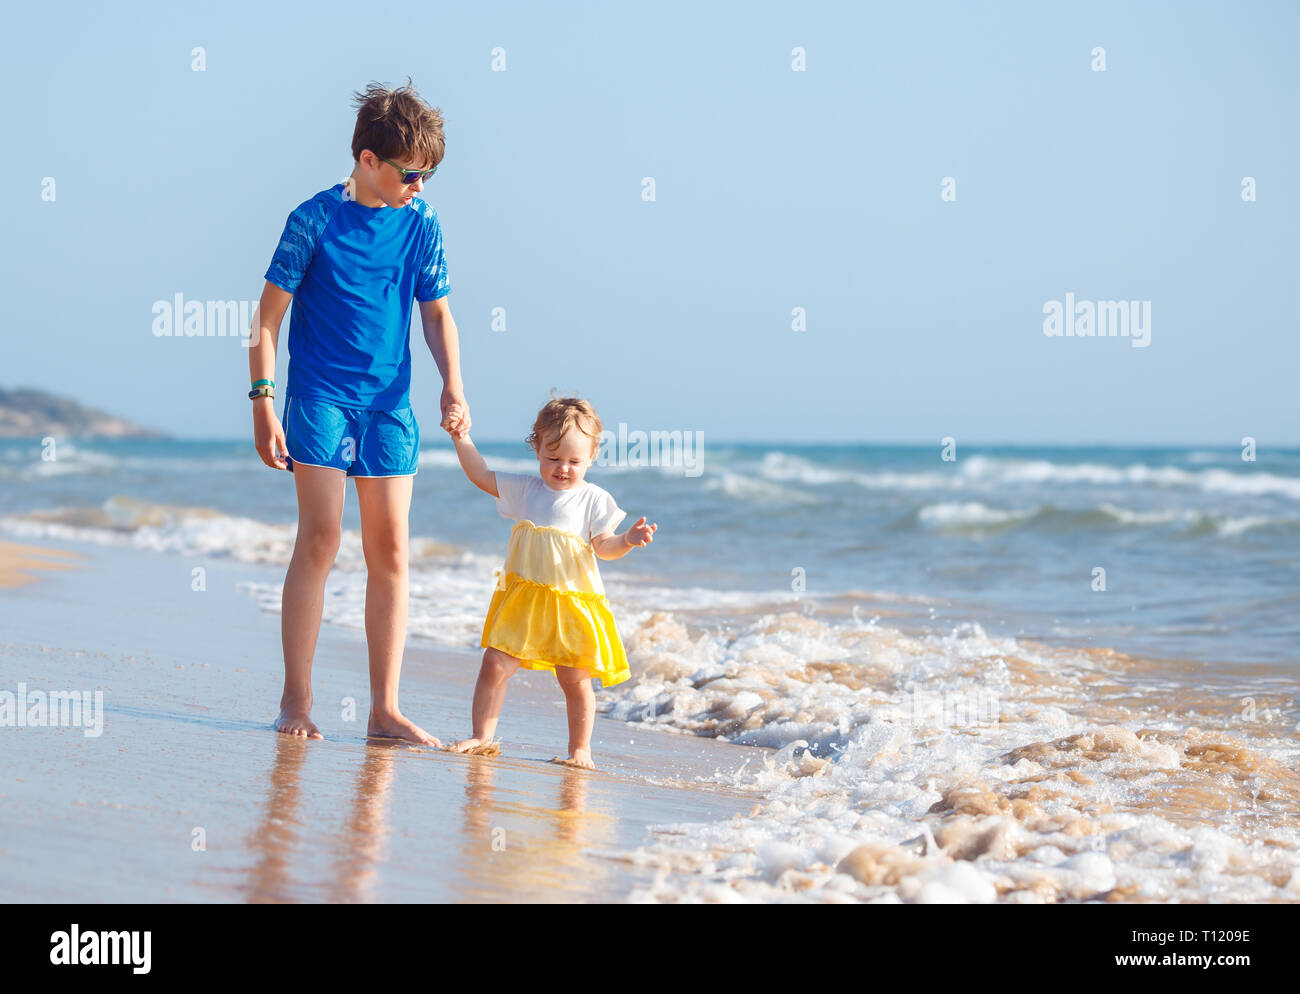 Kids playing on tropical beach. Big brother together with his little sister at sea shore at sunset. Family summer vacation. Children play with water.  Stock Photo